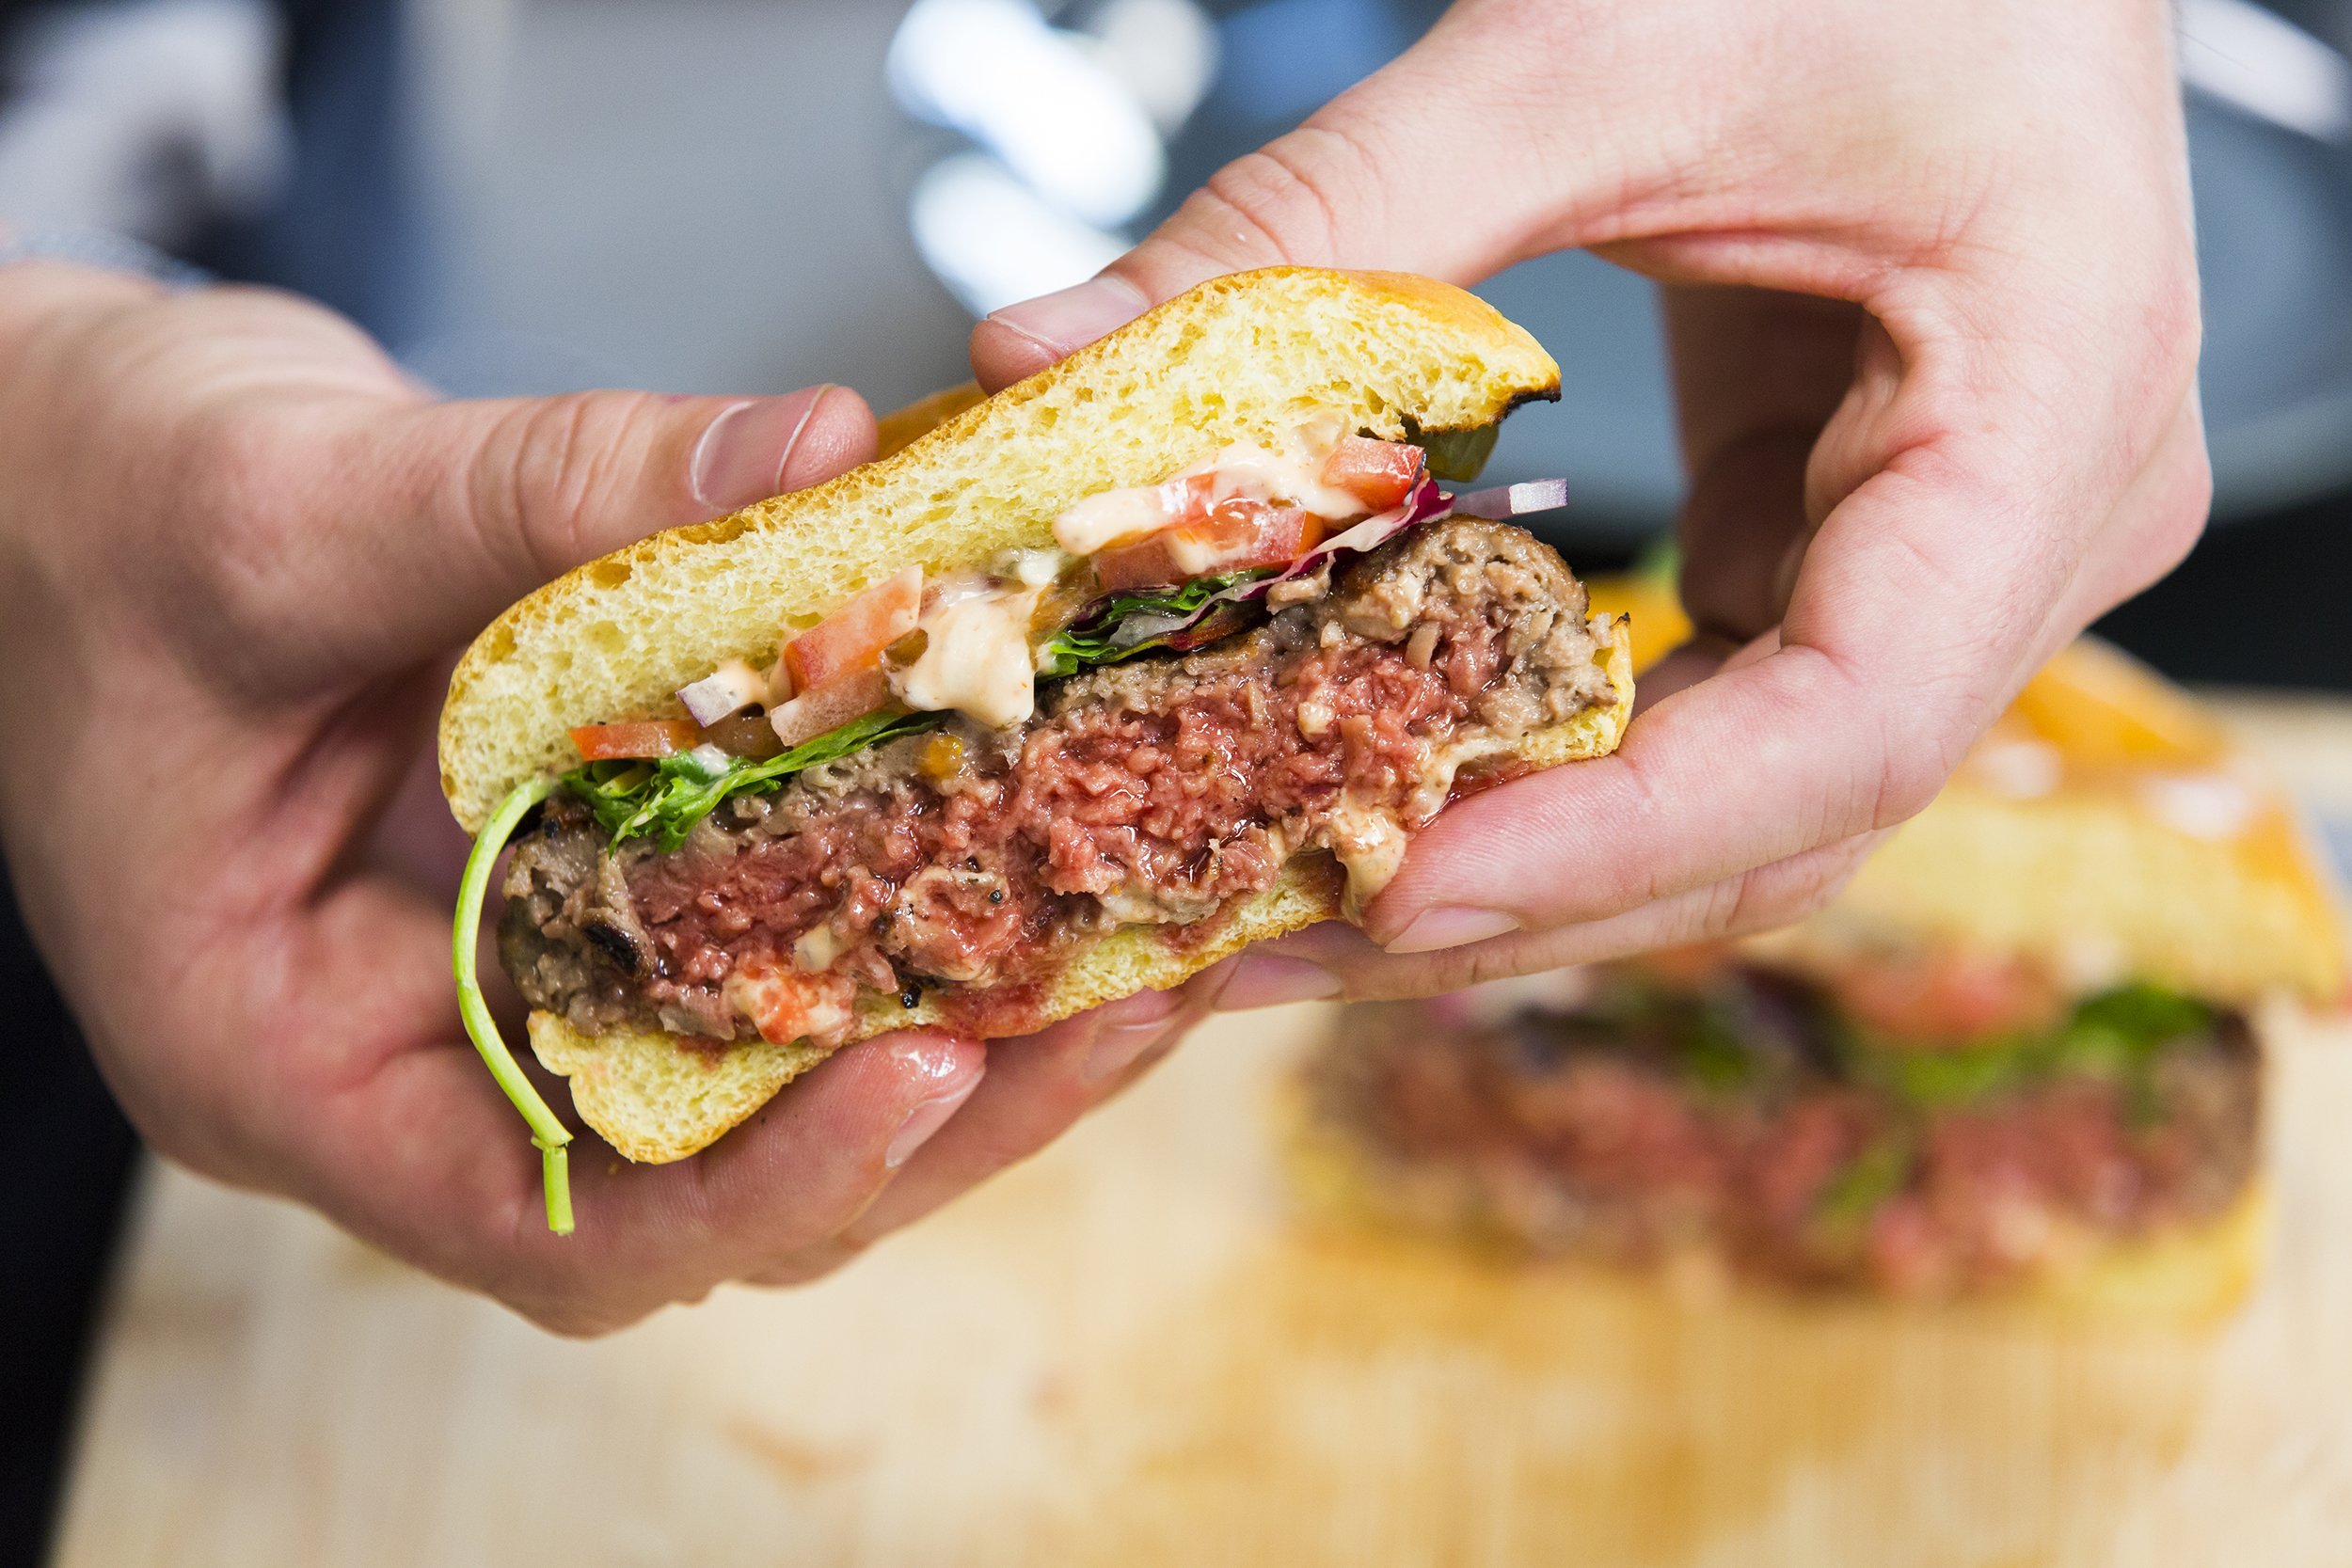 The Impossible Burger is hitting grocery shelves for the first time this week. (Credit: CNN)